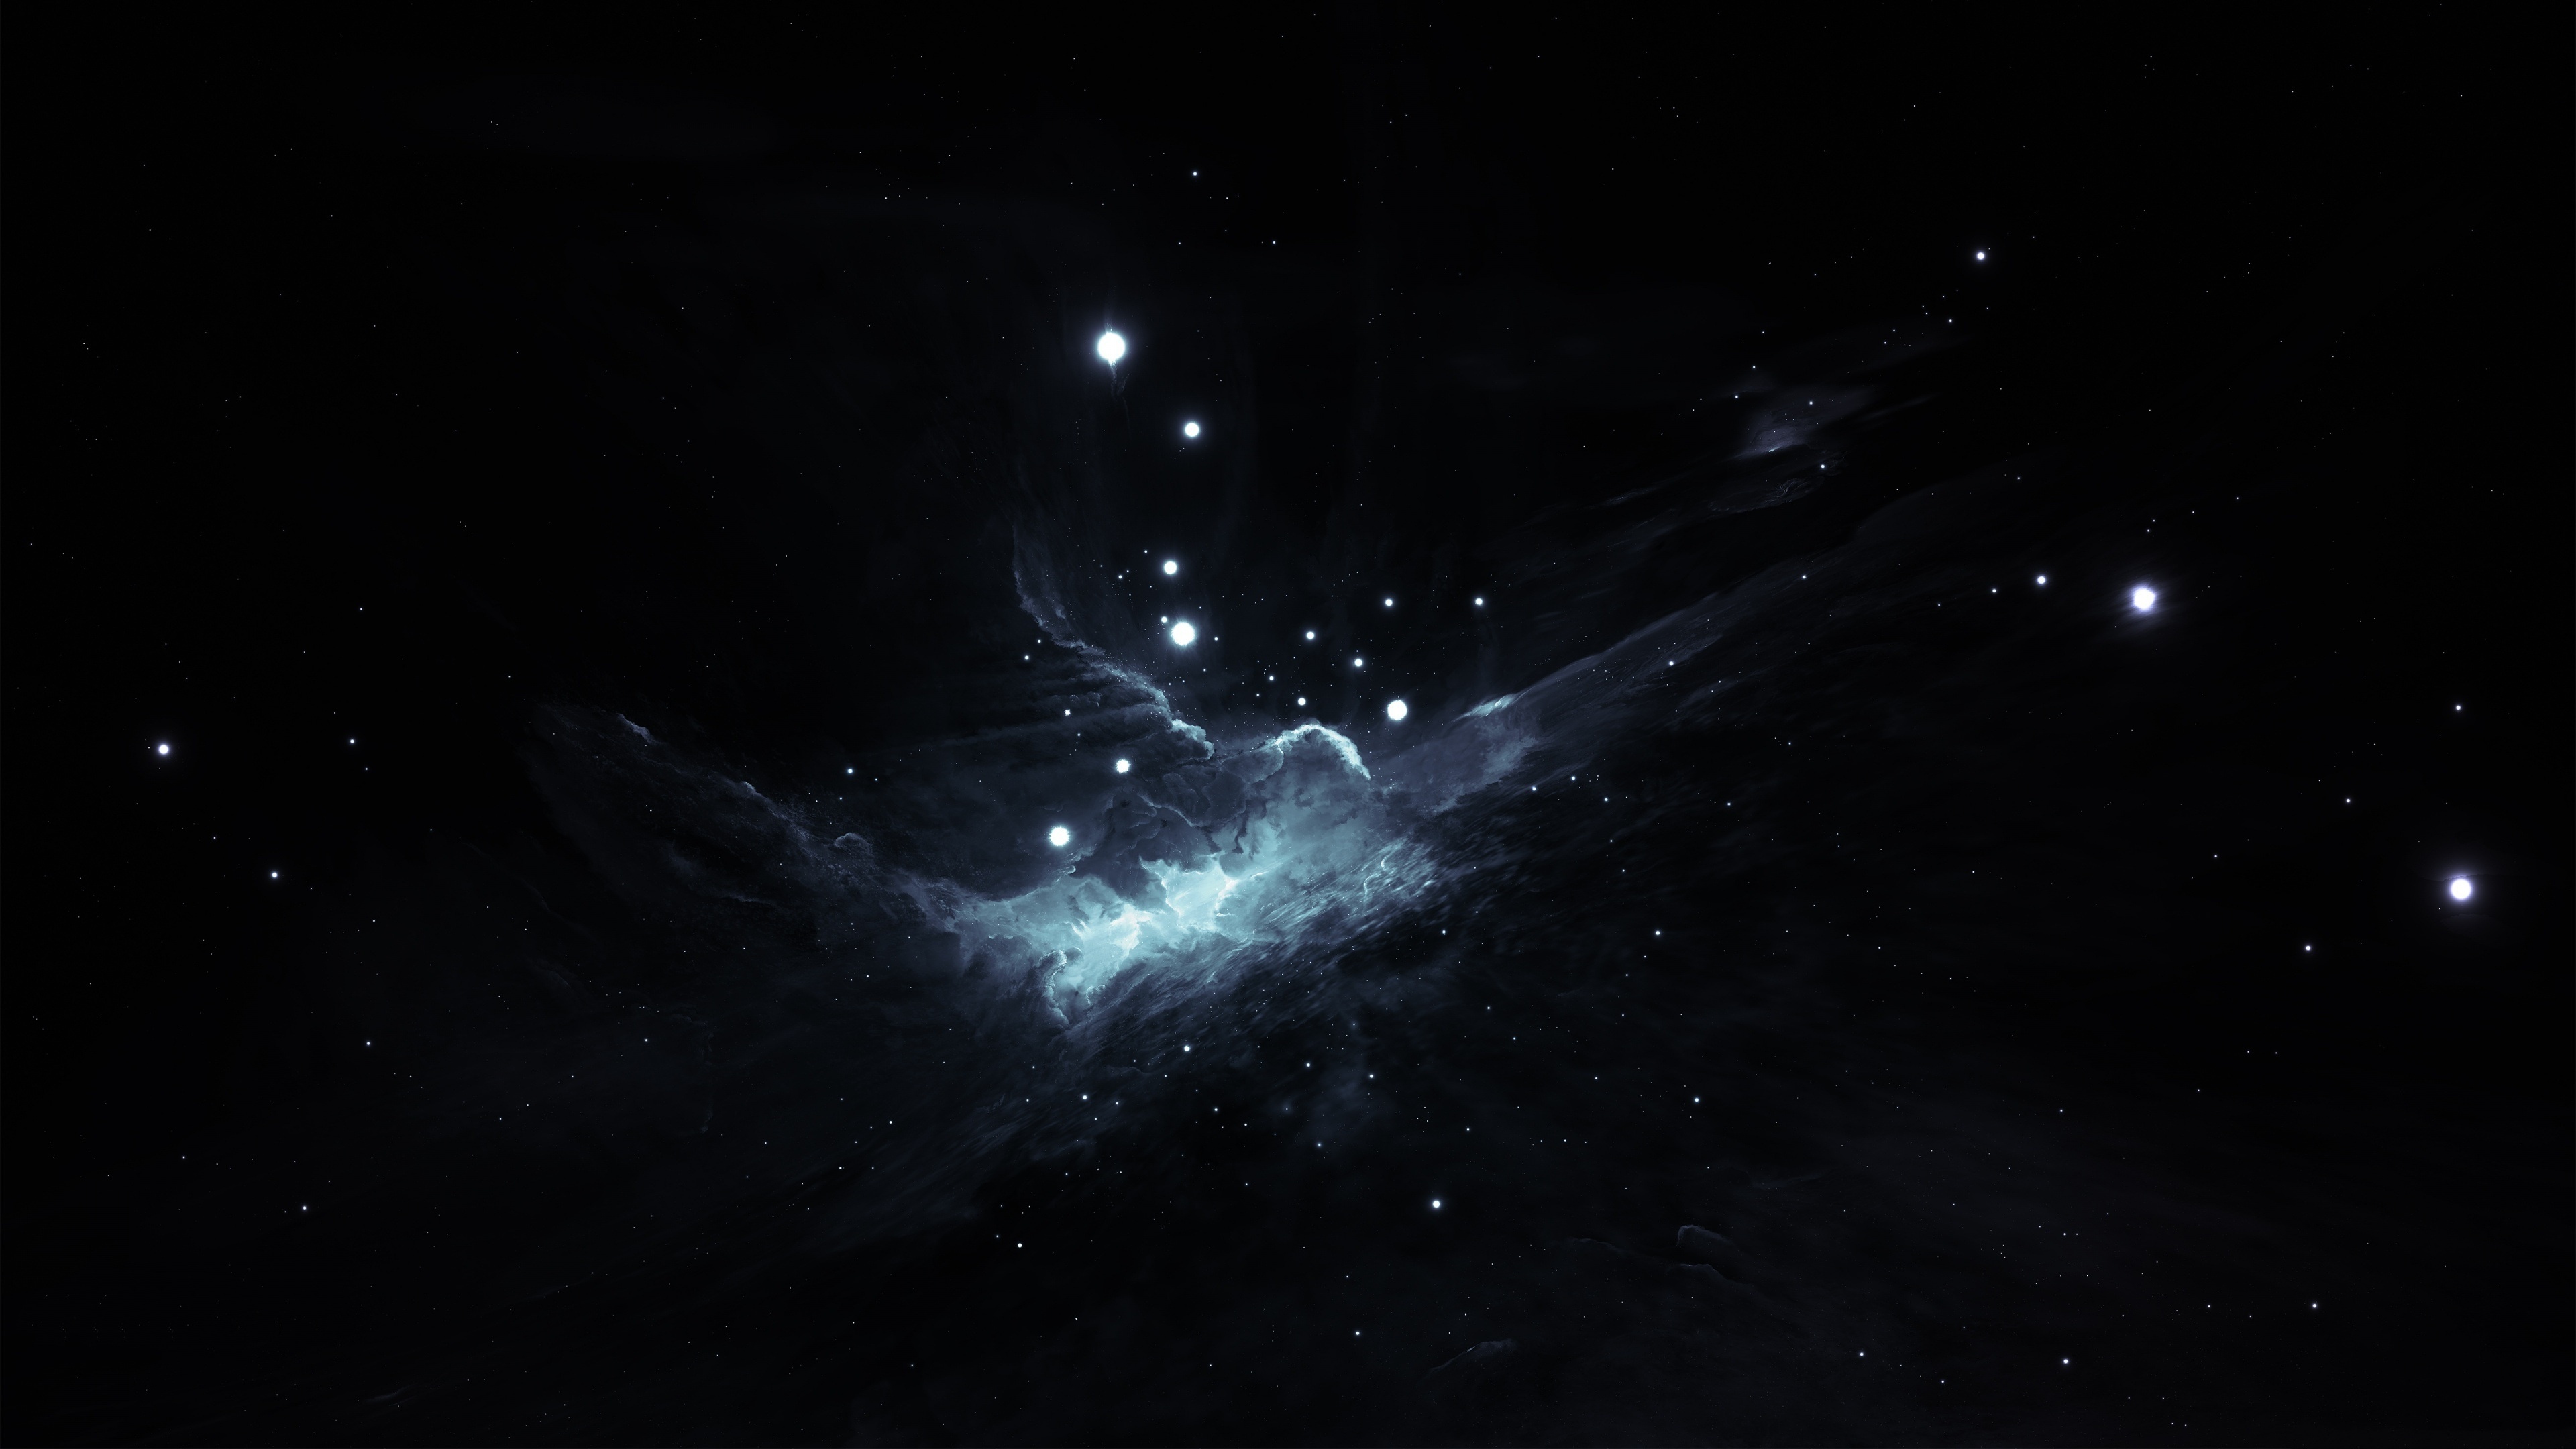 Download 3840x2160 Wallpaper Space Dark Clouds Galaxy Abstract